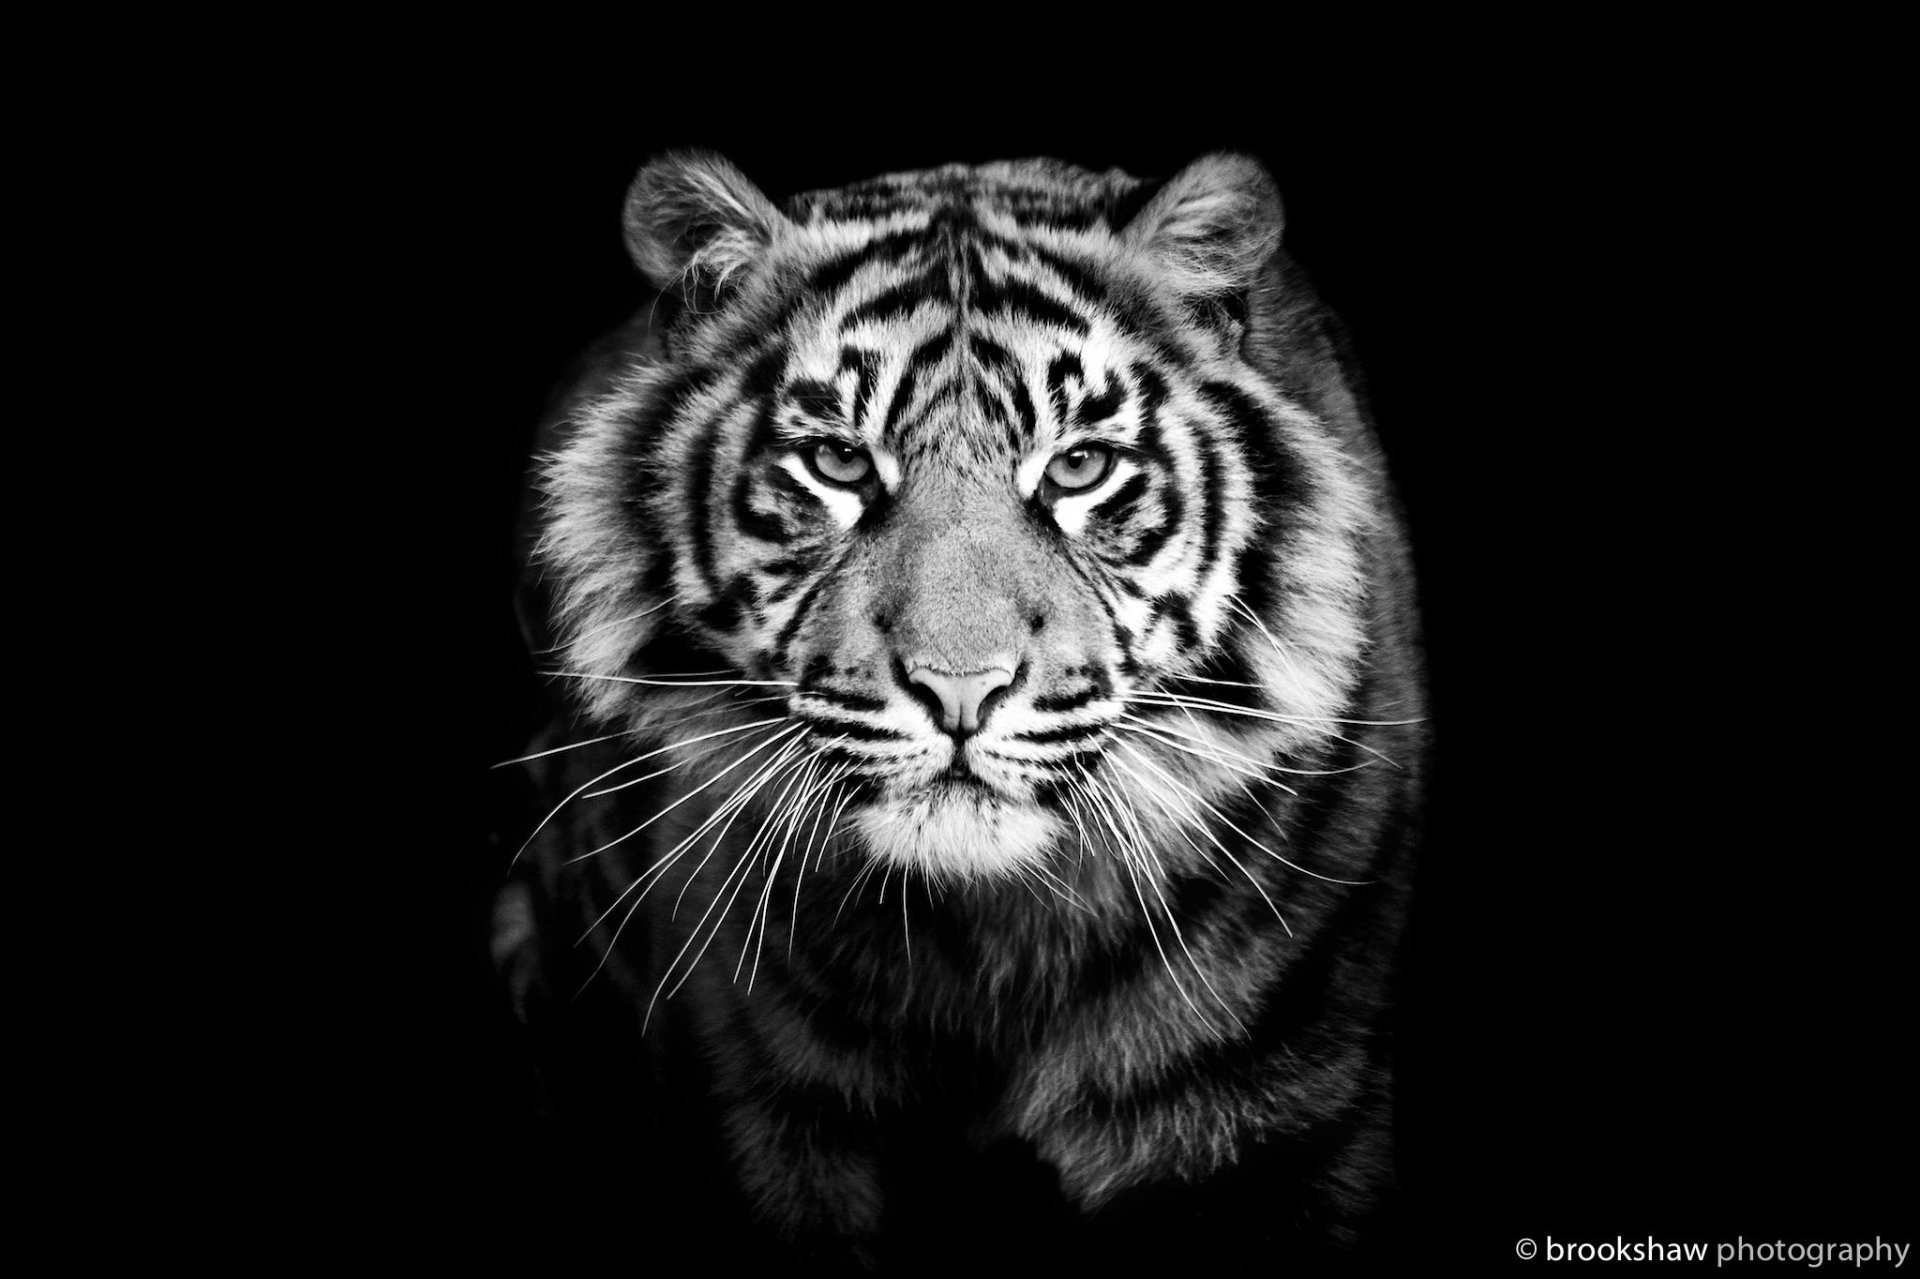 Tiger Predator Close Up Black And White Black Background - Tigers Black And White - HD Wallpaper 